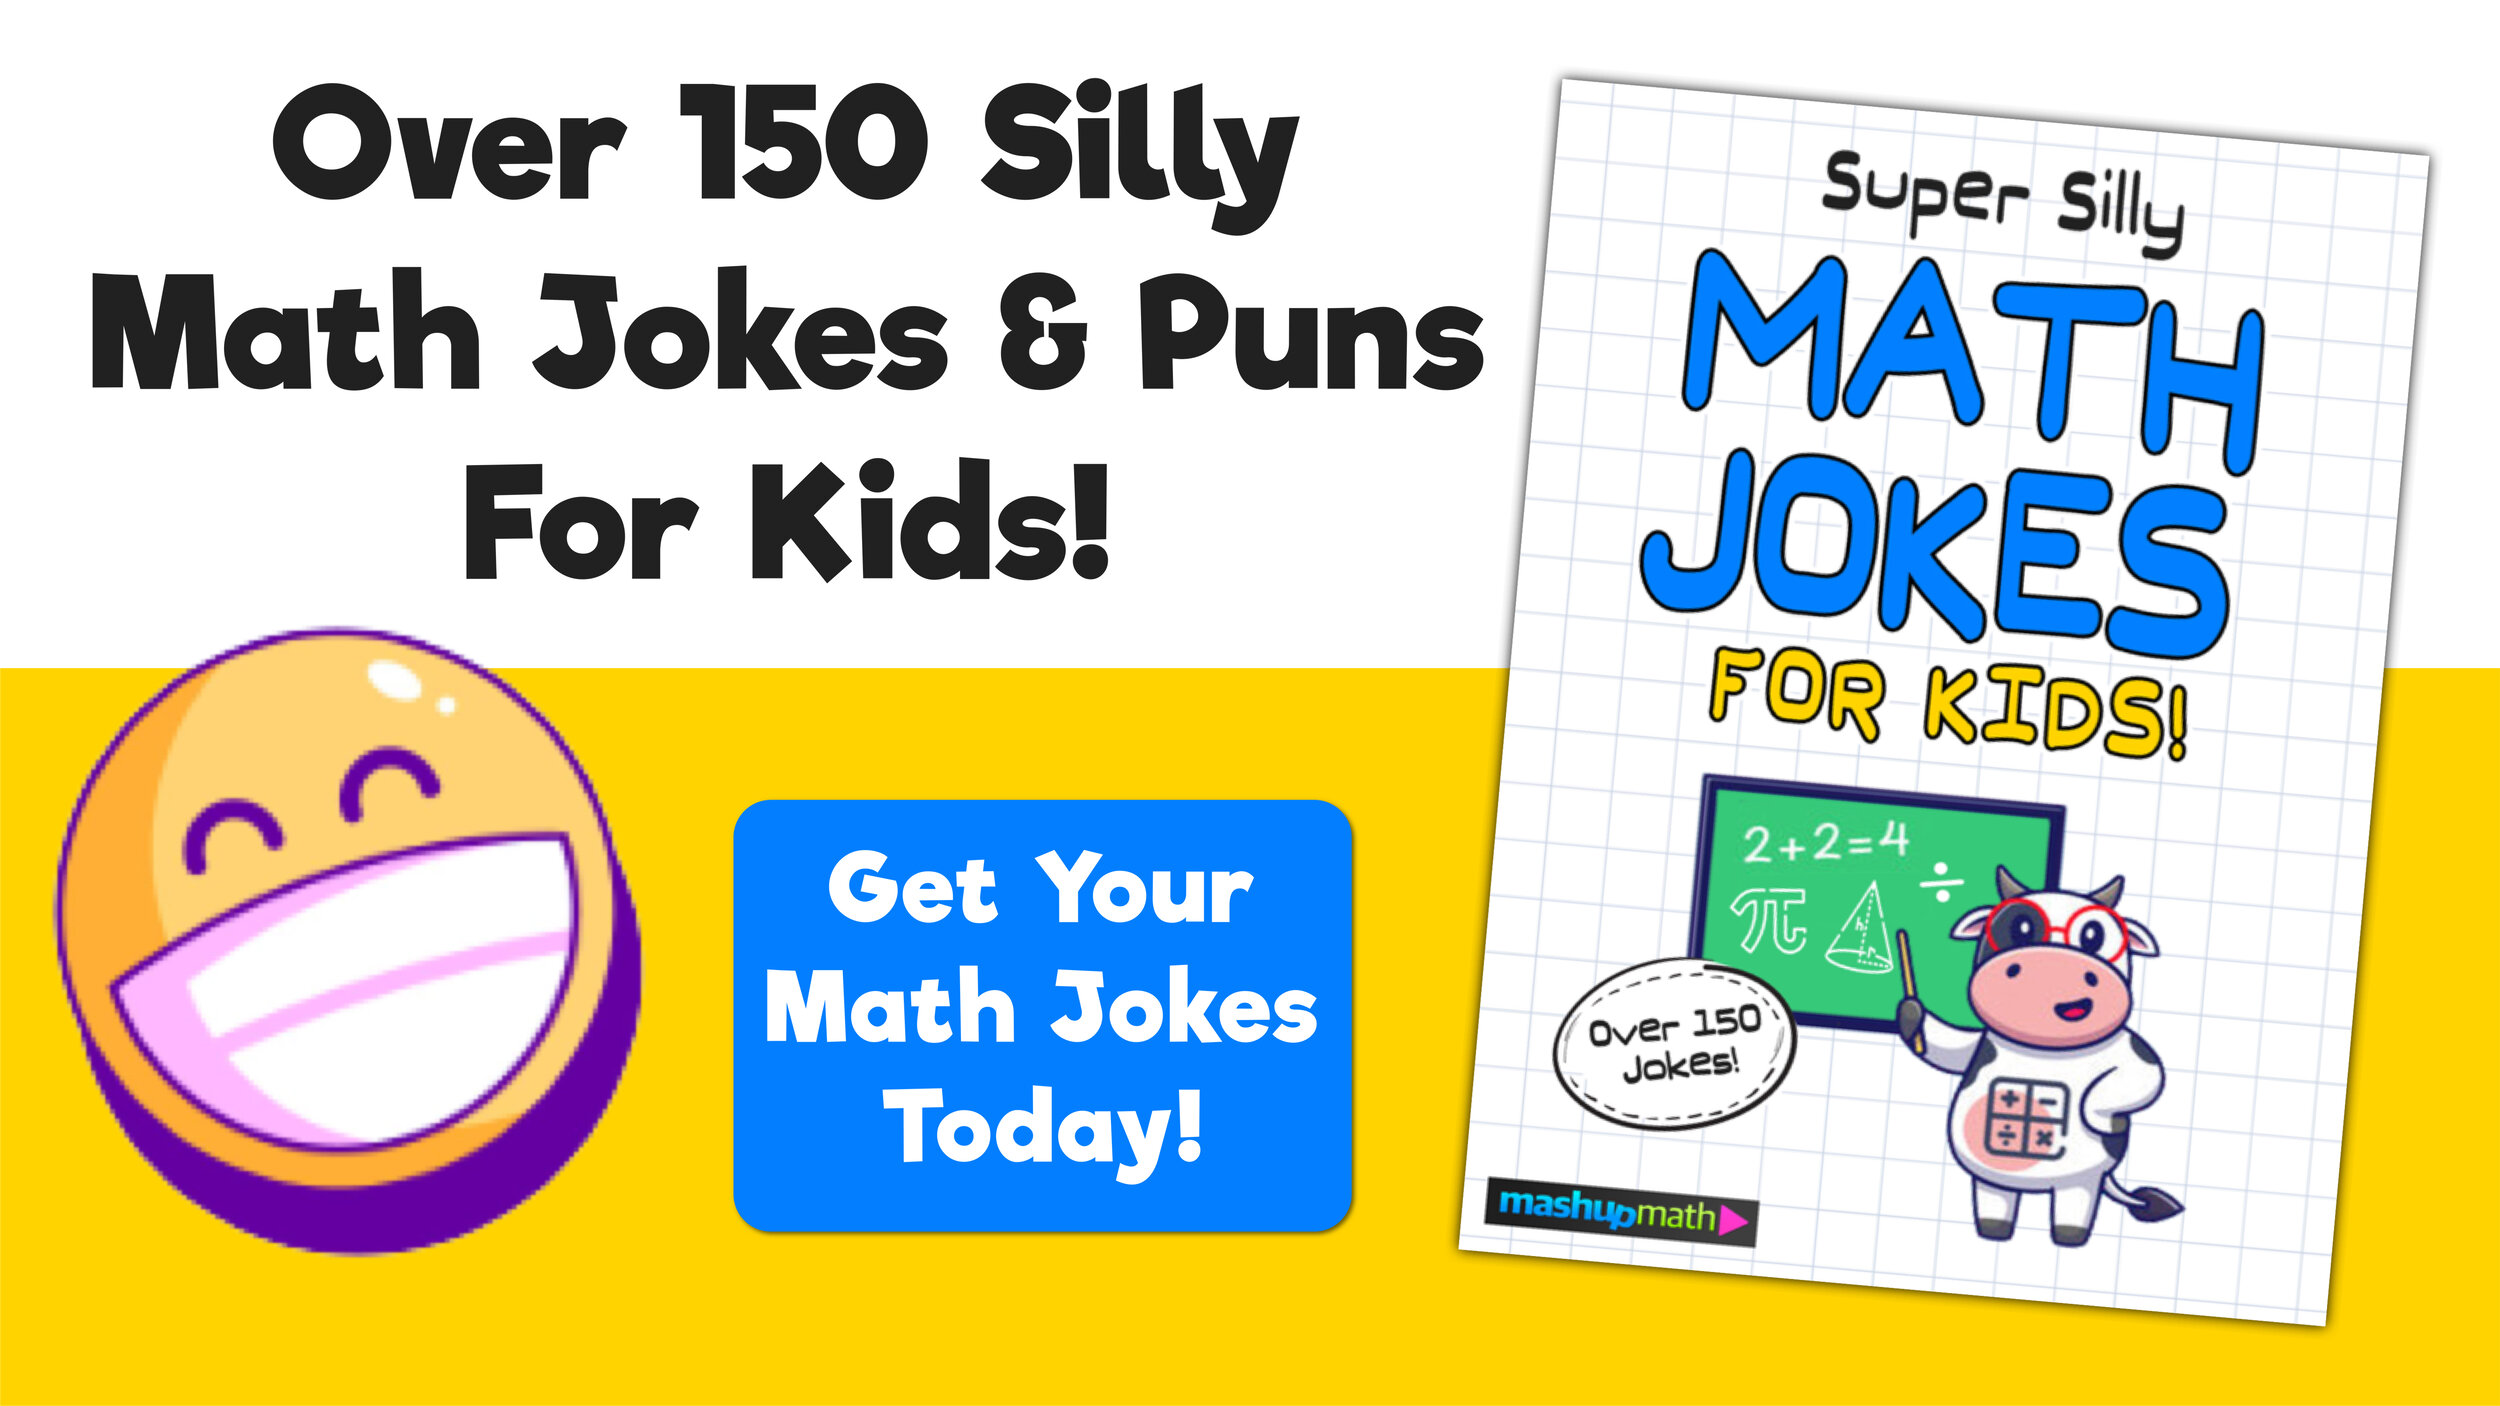 11 Super Cute and Funny Math Jokes and Puns for Students — Mashup Math